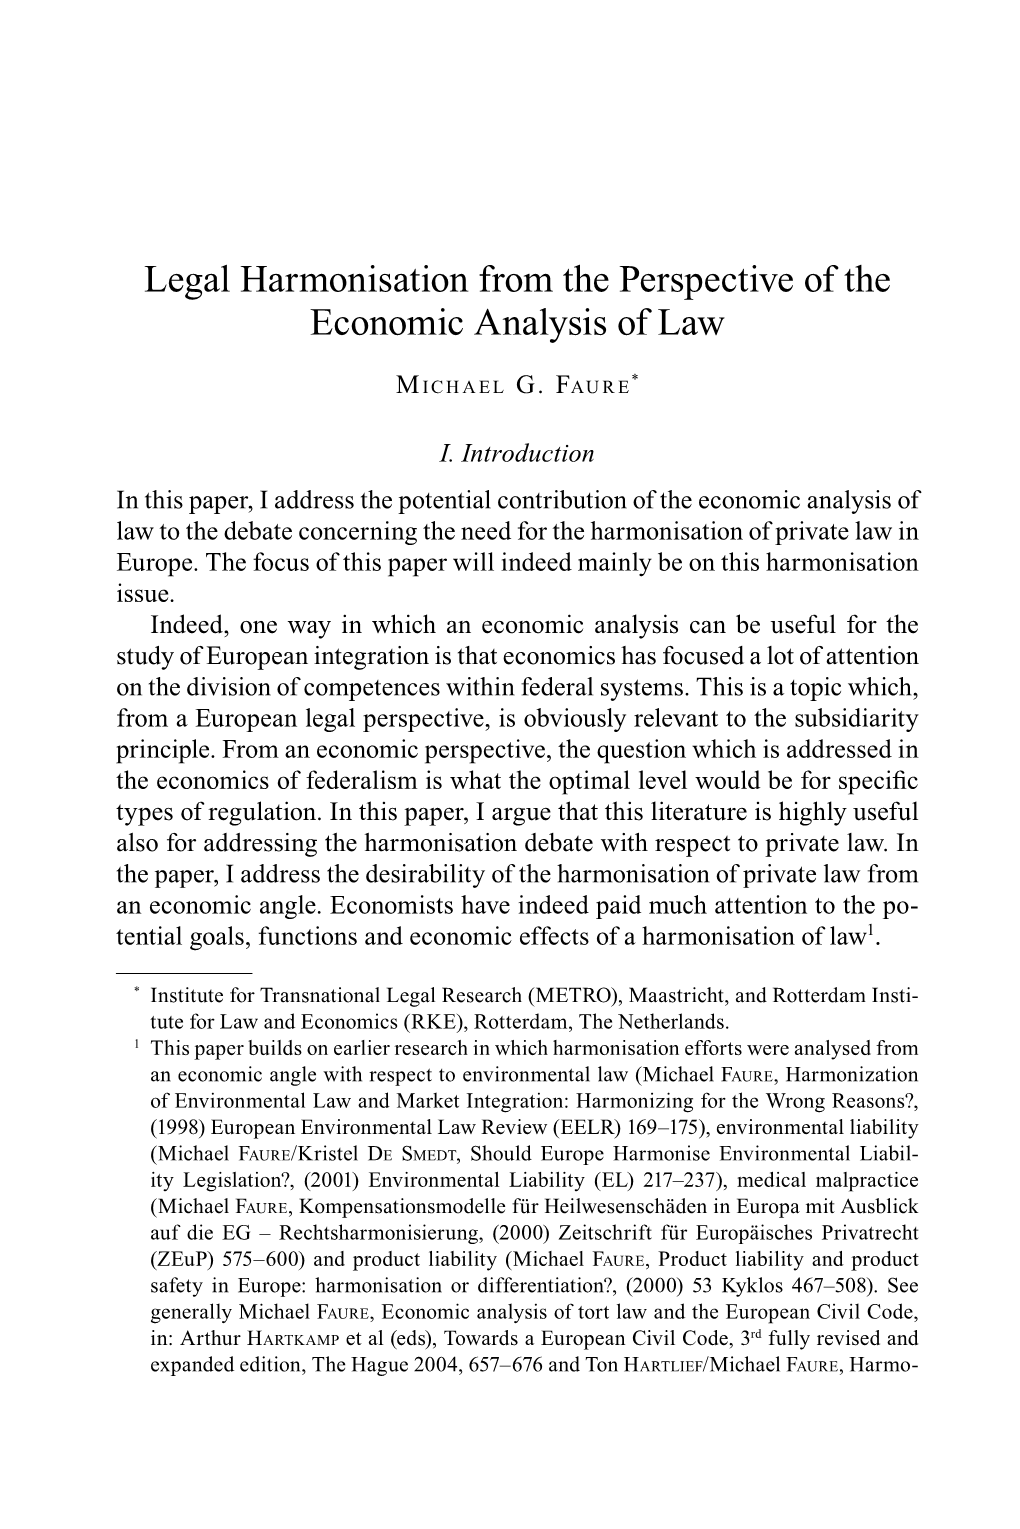 Legal Harmonisation from the Perspective of the Economic Analysis of Law